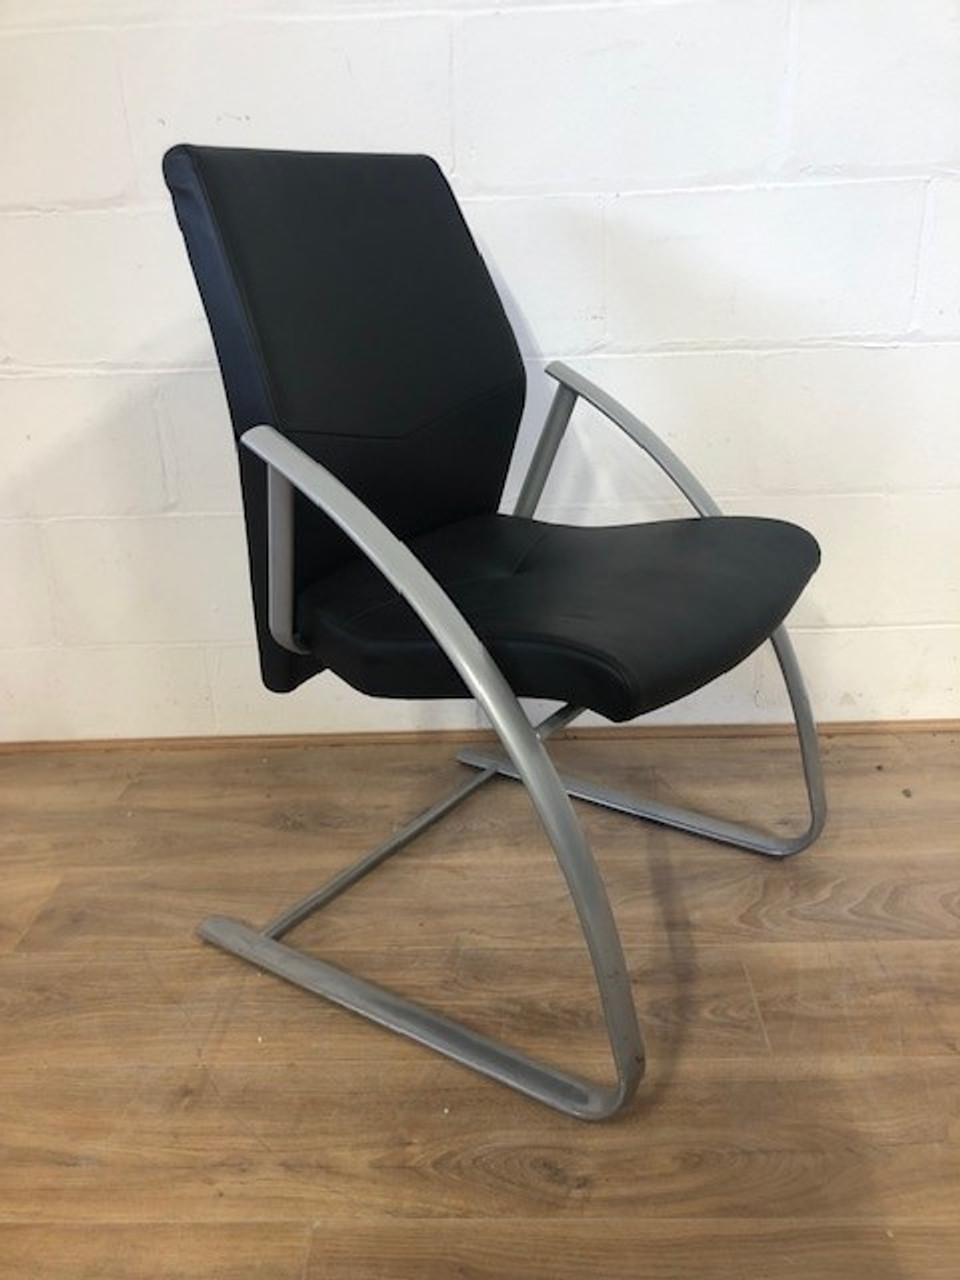 Verco Vita chairs_used office chairs essex_second hand office furniture essex